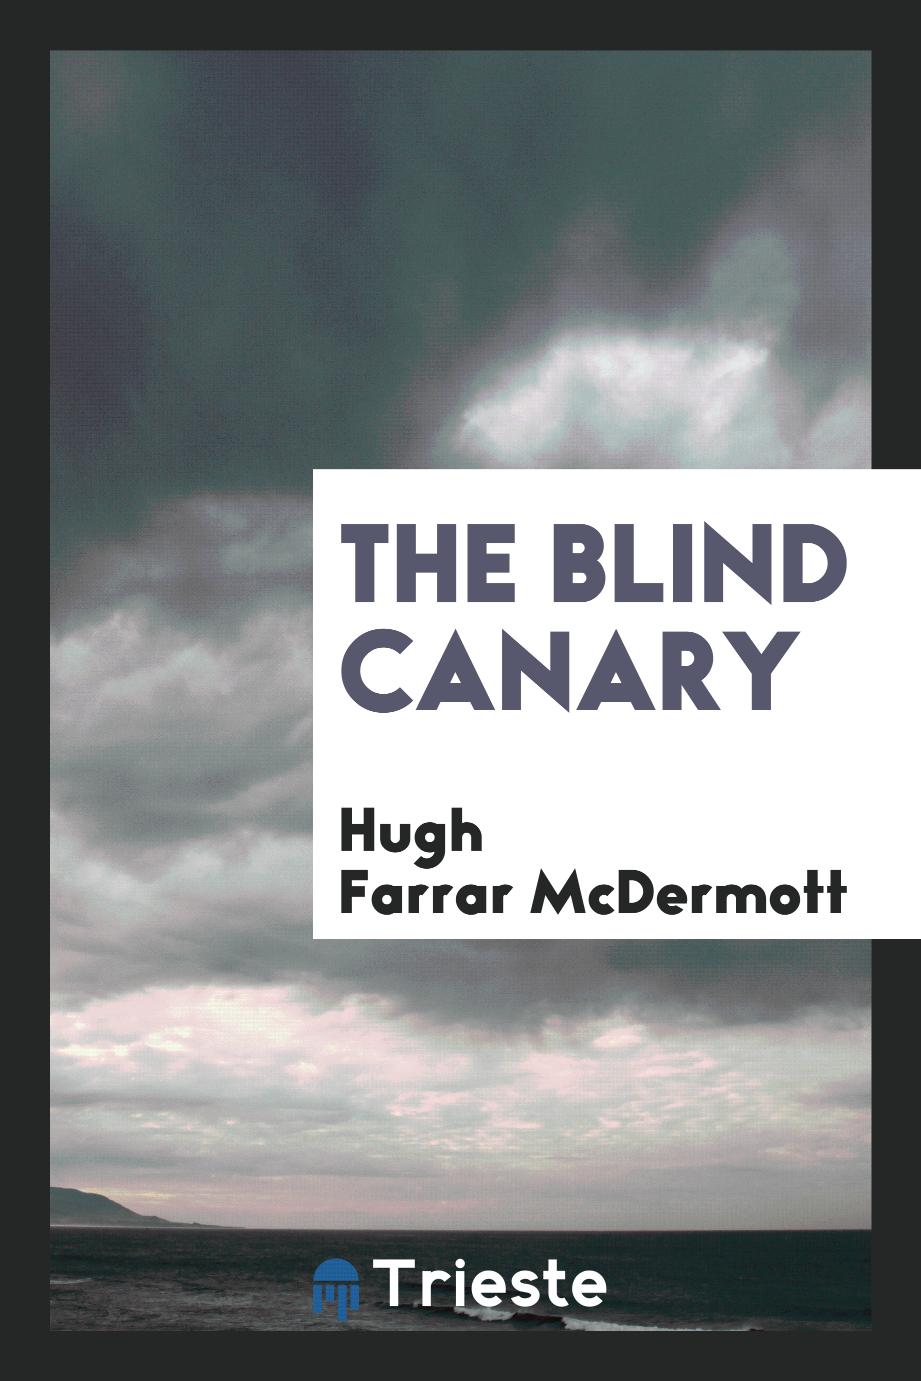 The Blind Canary